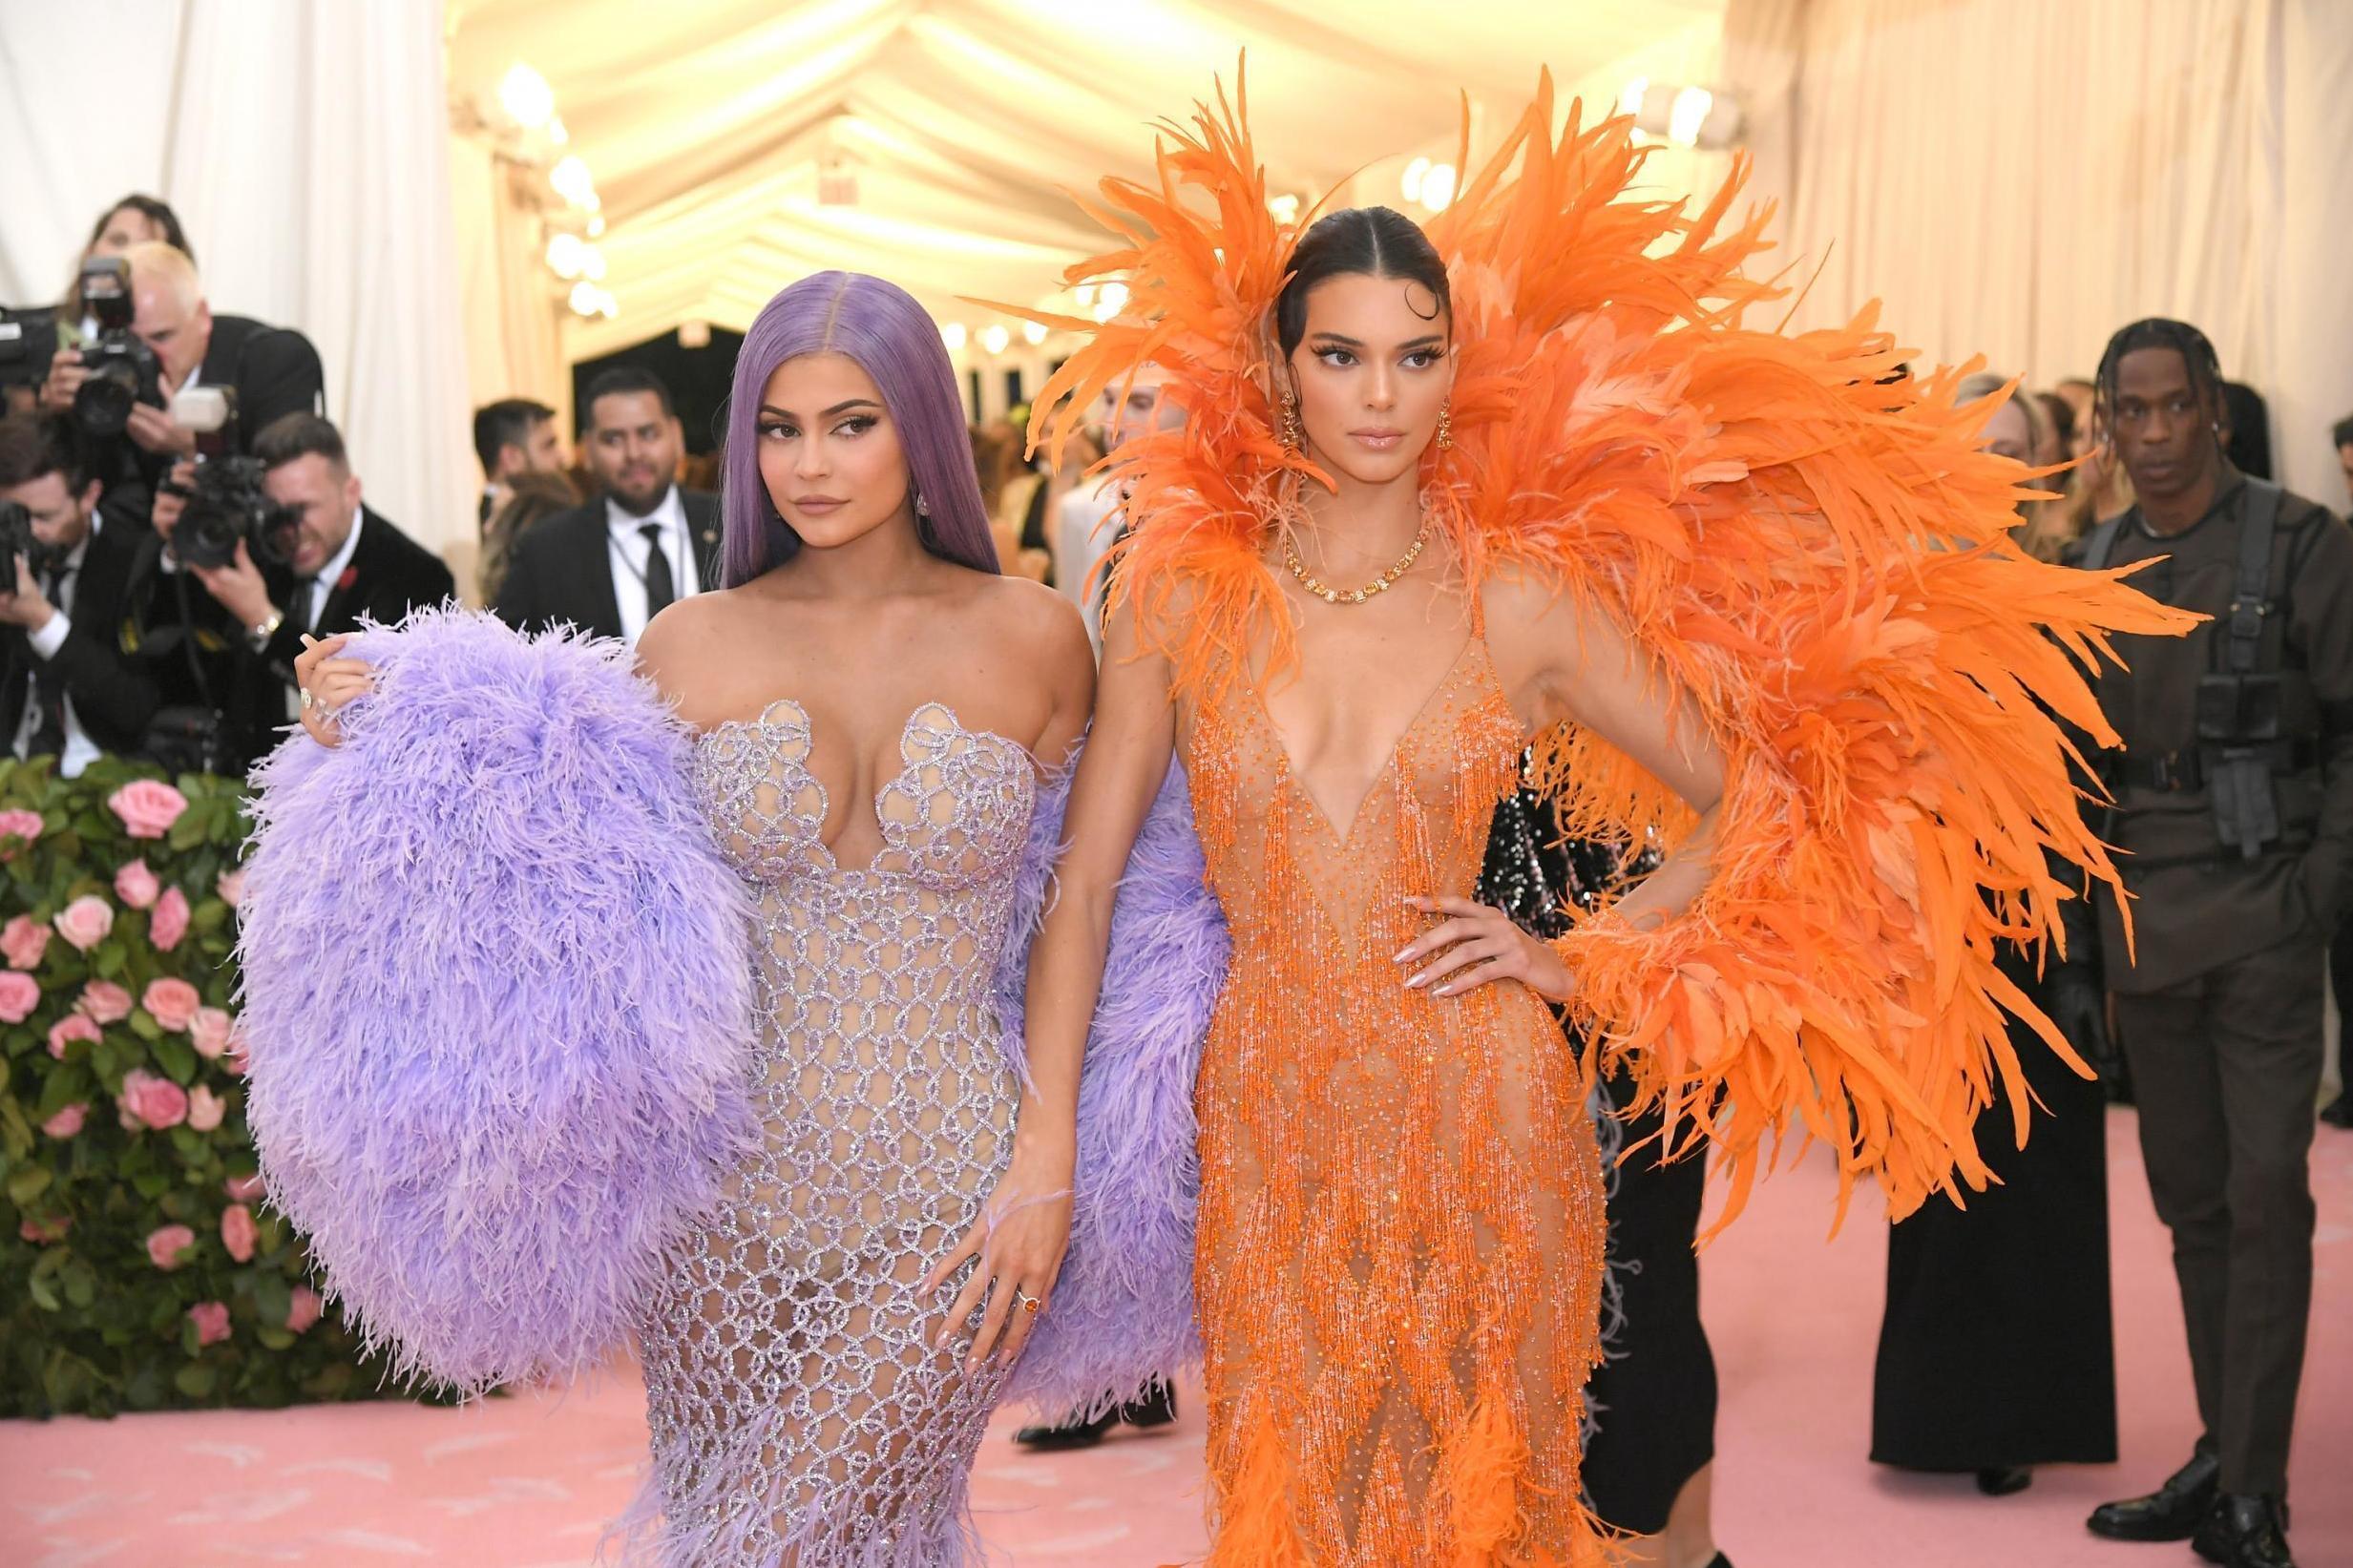 Kylie and Kendall Jenner deny claims clothing company failed to pay factory workers (Getty)